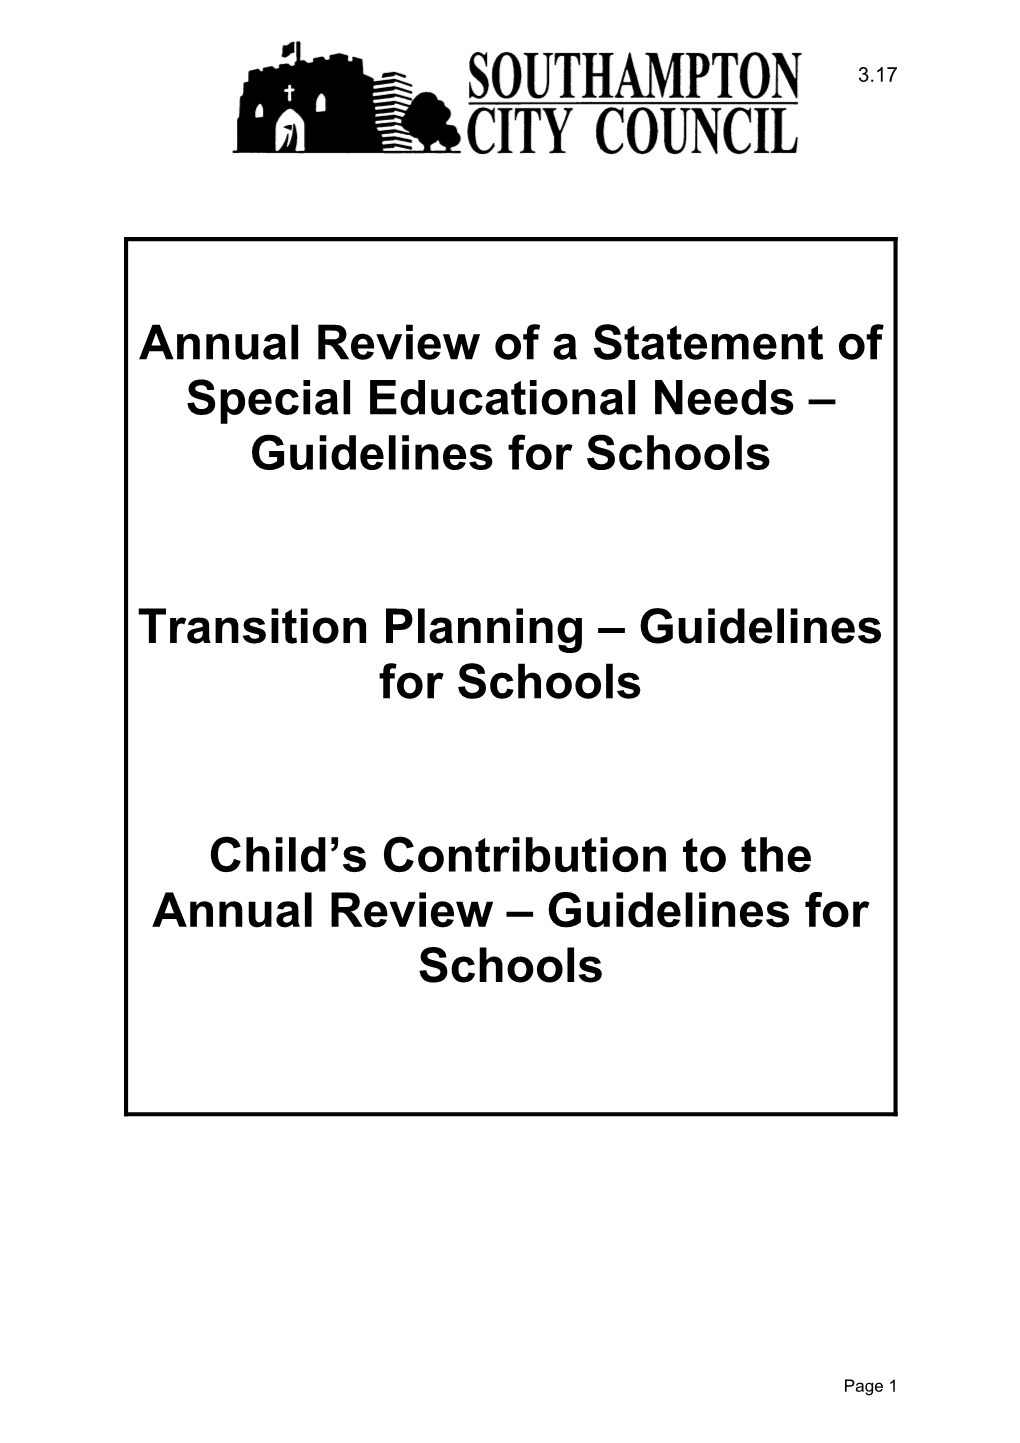 Annual Review of a Statement of Special Educational Needs Guidelines for Schools